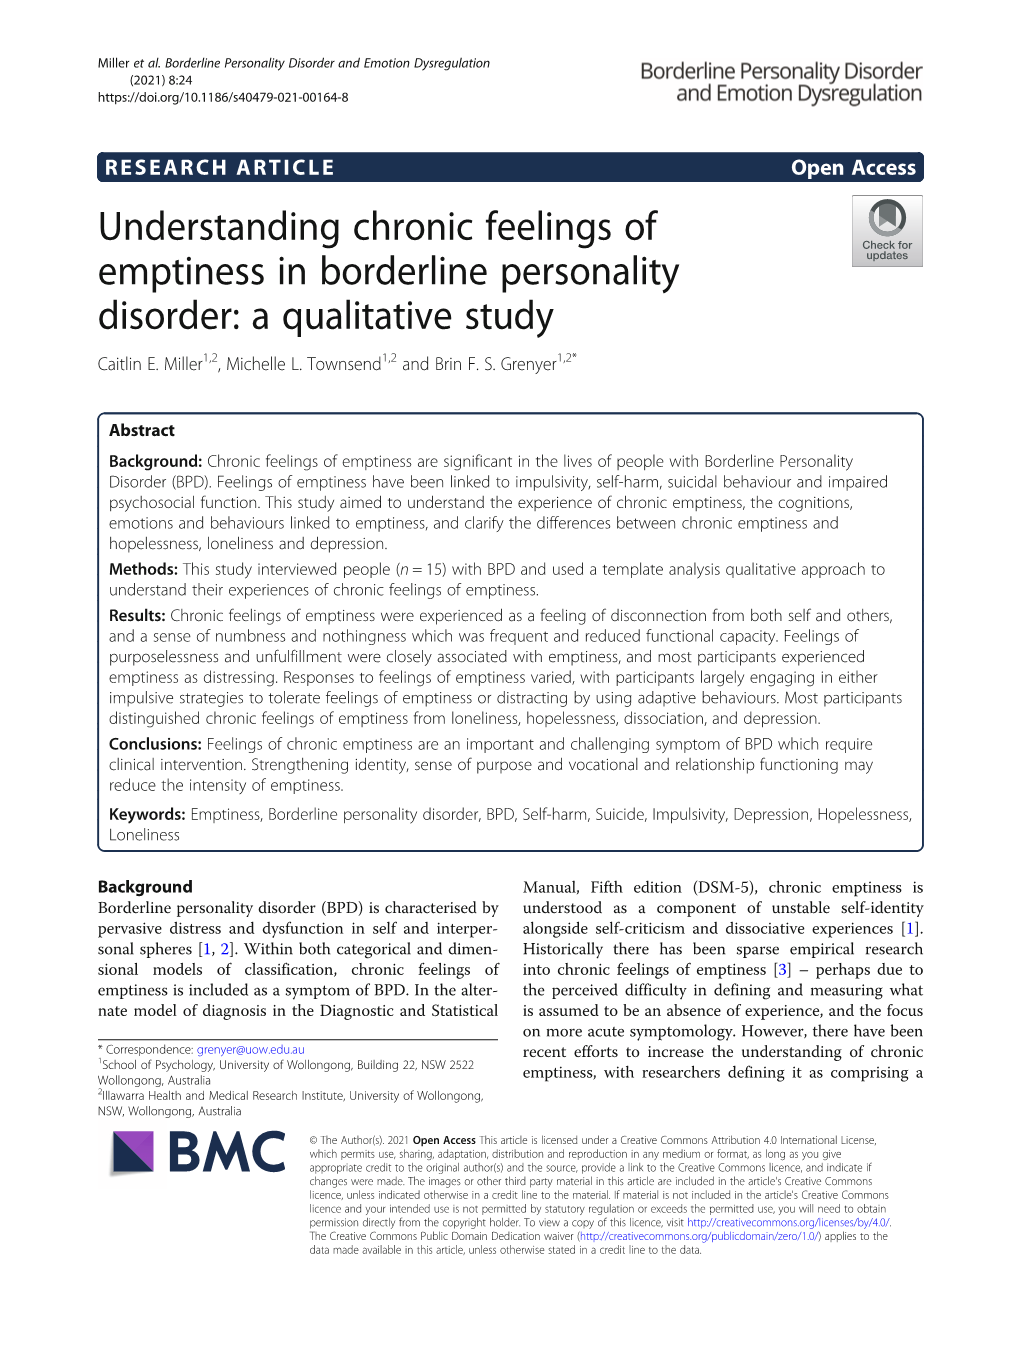 Understanding Chronic Feelings of Emptiness in Borderline Personality Disorder: a Qualitative Study Caitlin E